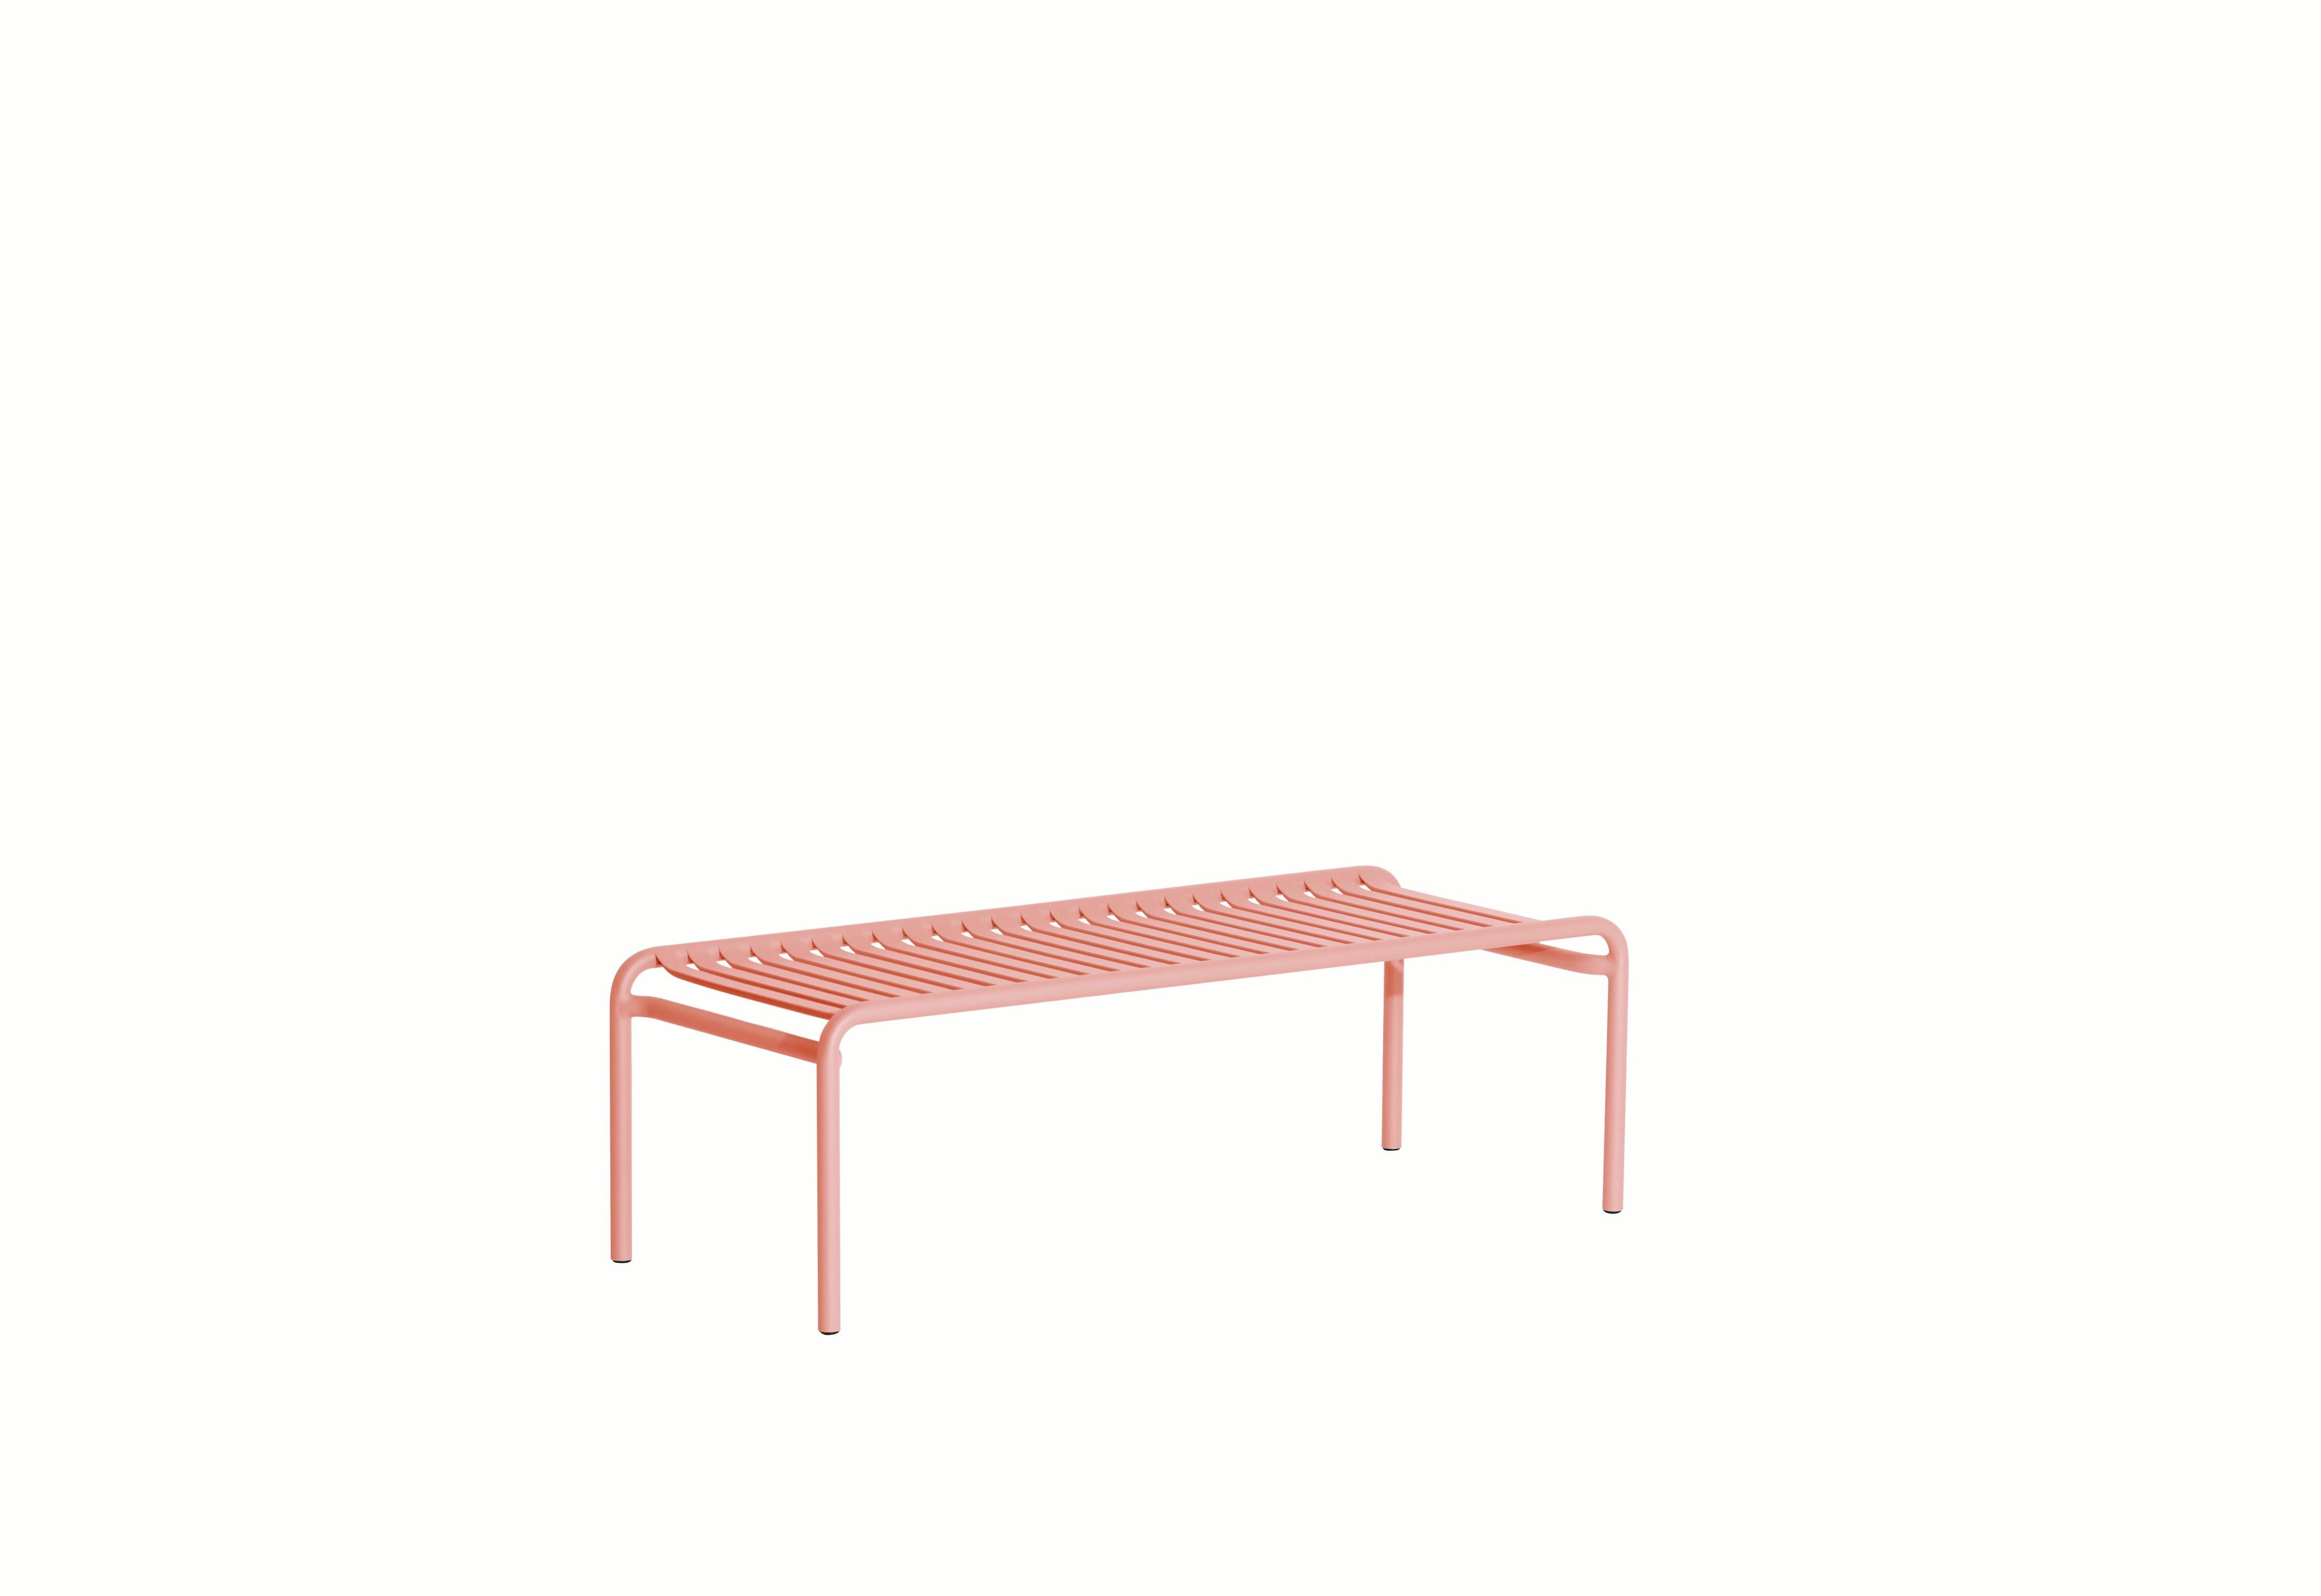 Petite Friture Week-End Long Coffee Table in Blush Aluminium by Studio BrichetZiegler, 2017

The week-end collection is a full range of outdoor furniture, in aluminium grained epoxy paint, matt finish, that includes 18 functions and 8 colours for